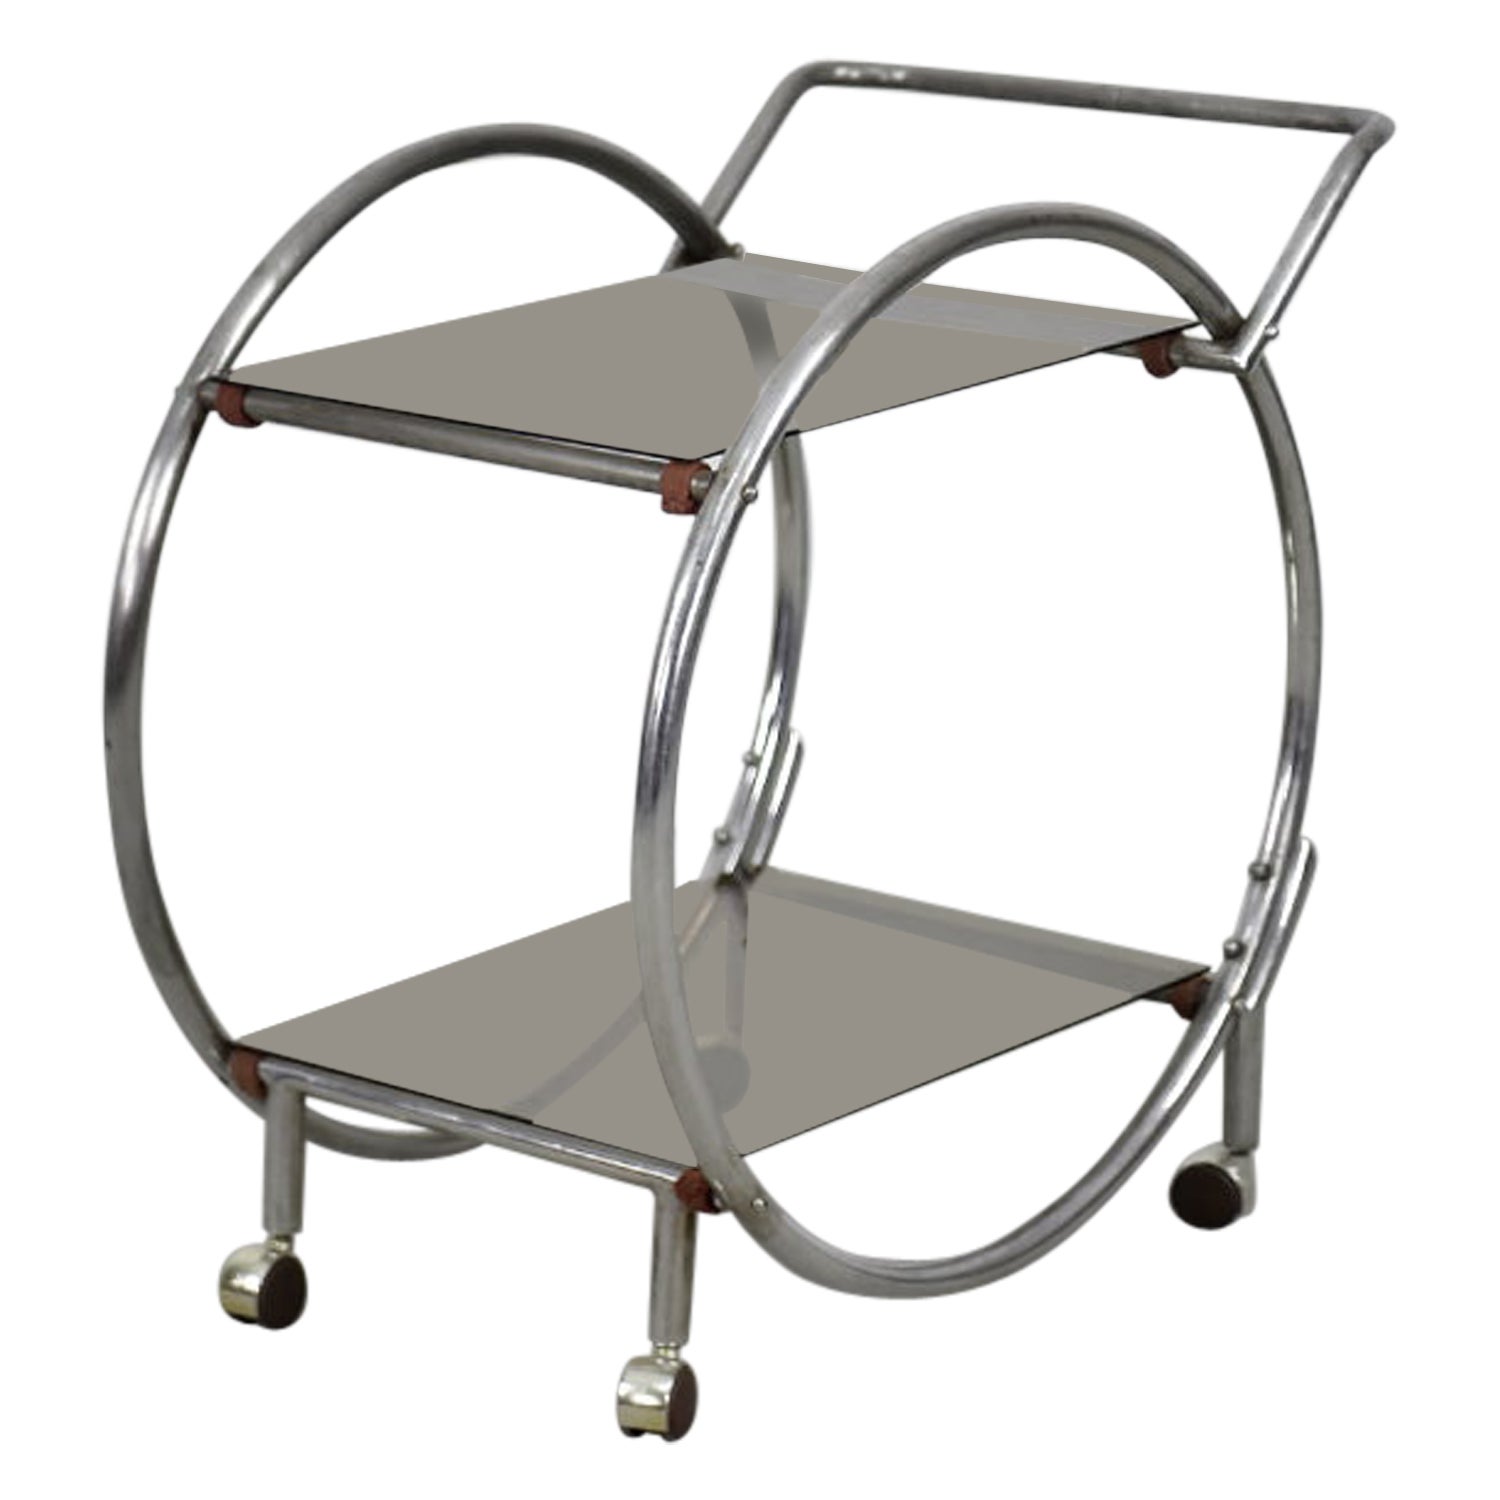 Vintage Art Déco Chrome and Brown Smoked Glass Round Two-level Bar Cart, 1930s For Sale